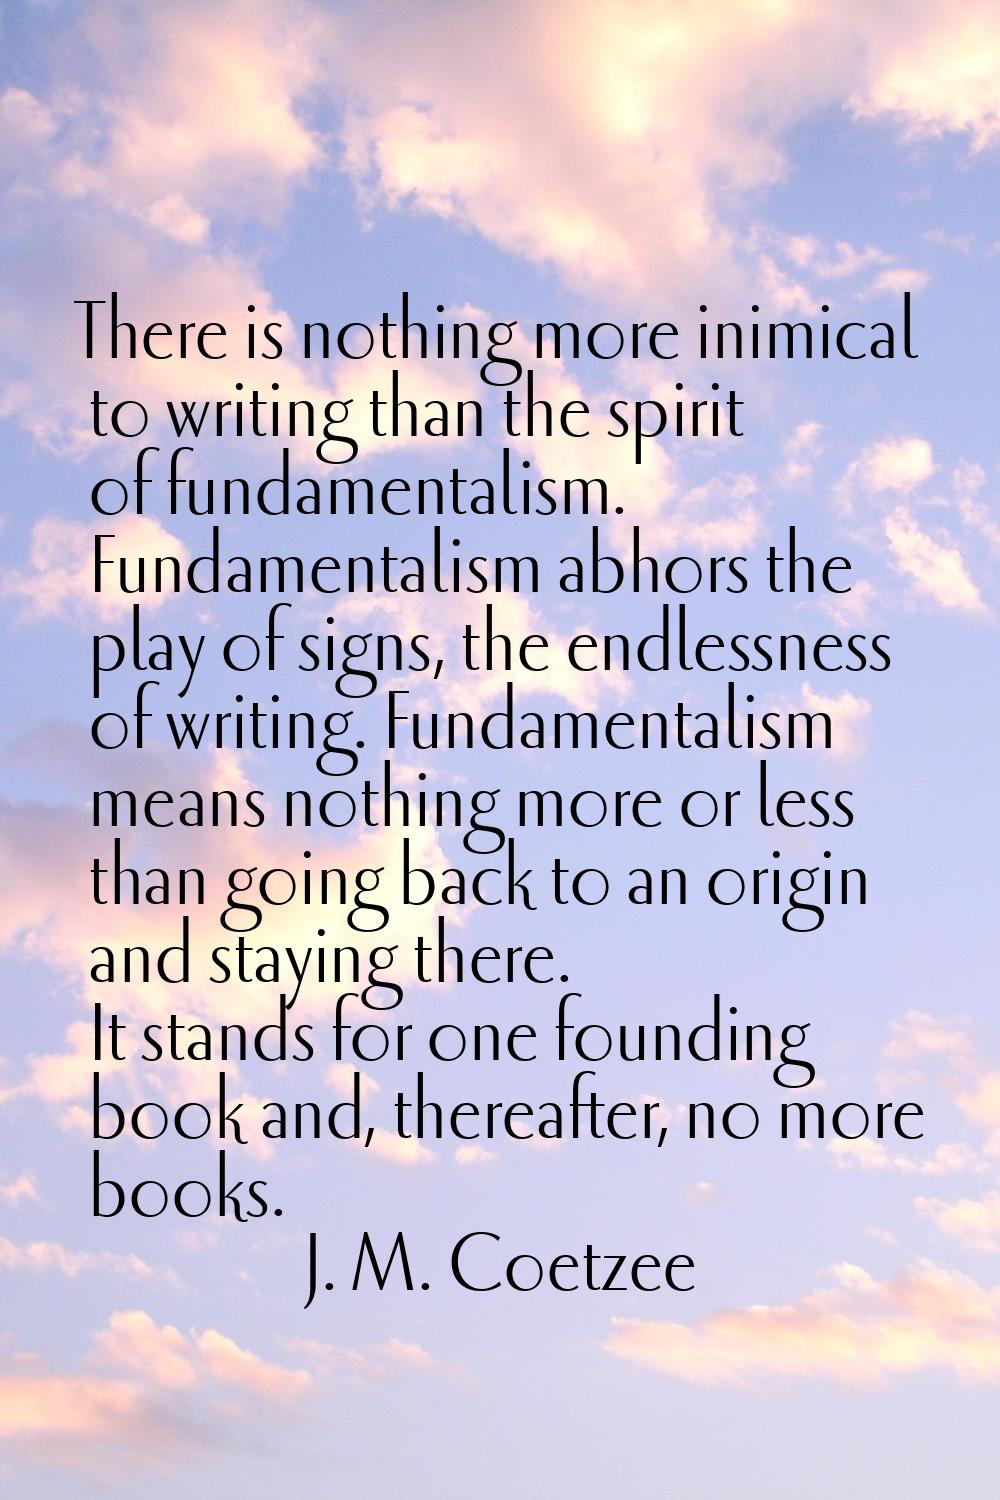 There is nothing more inimical to writing than the spirit of fundamentalism. Fundamentalism abhors 